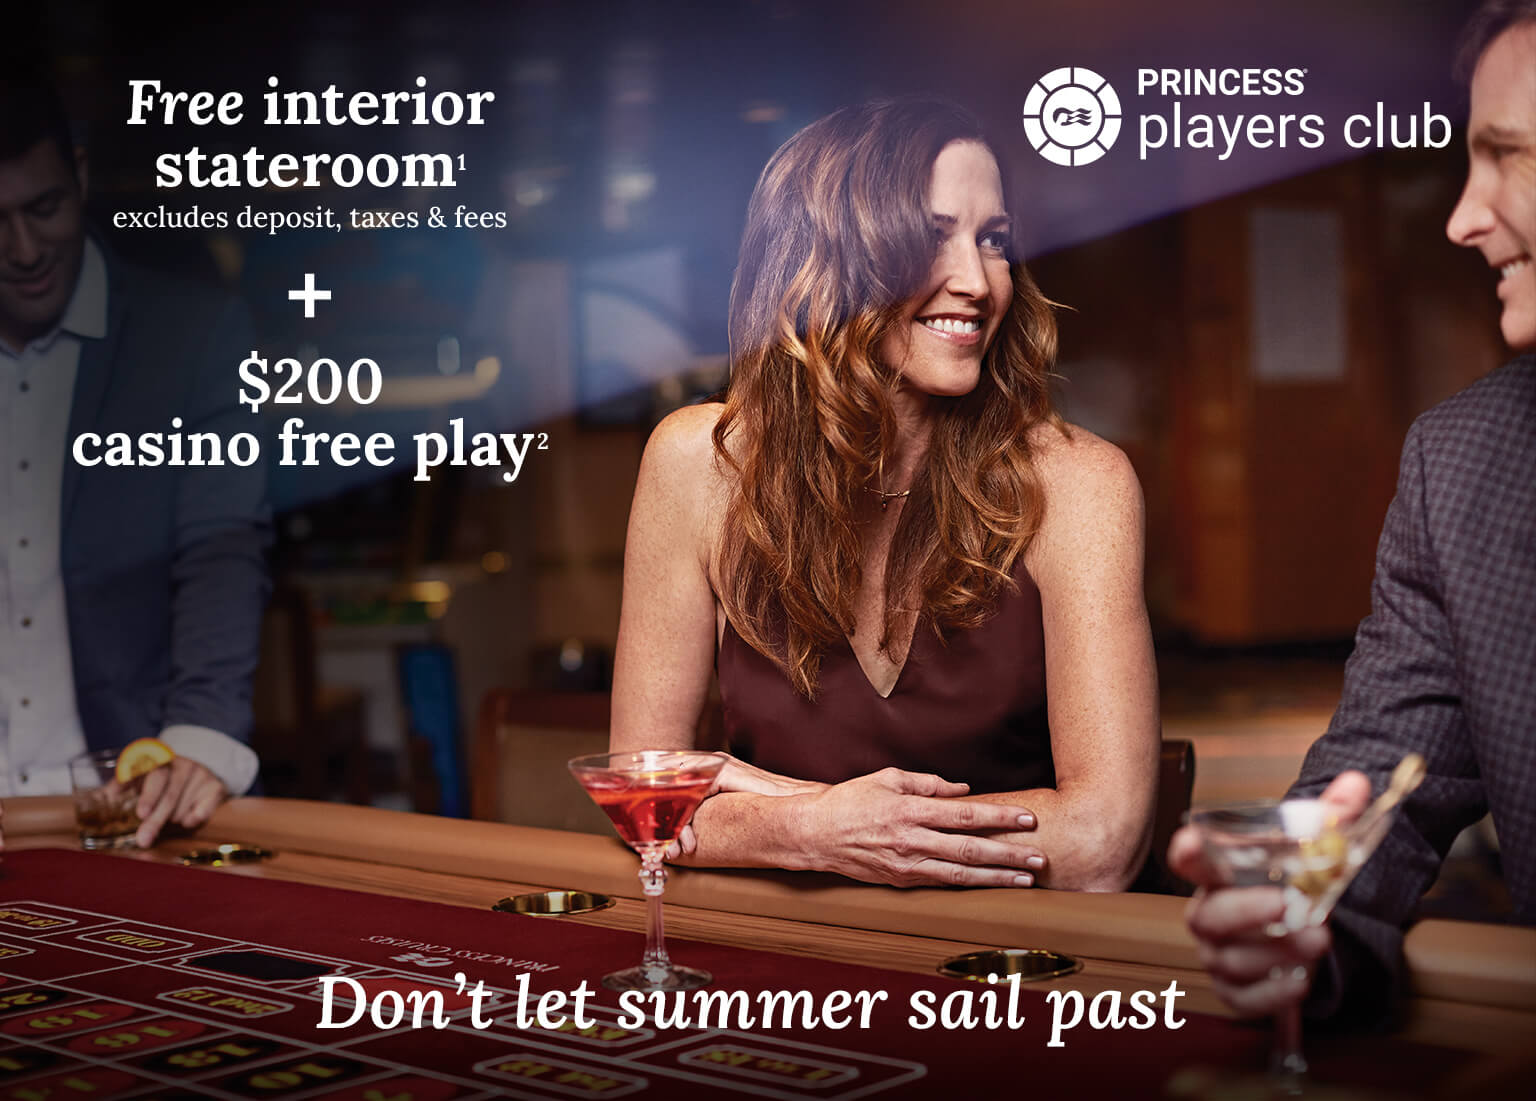 Free interior stateroom + $200 casino free play. Click here to book.